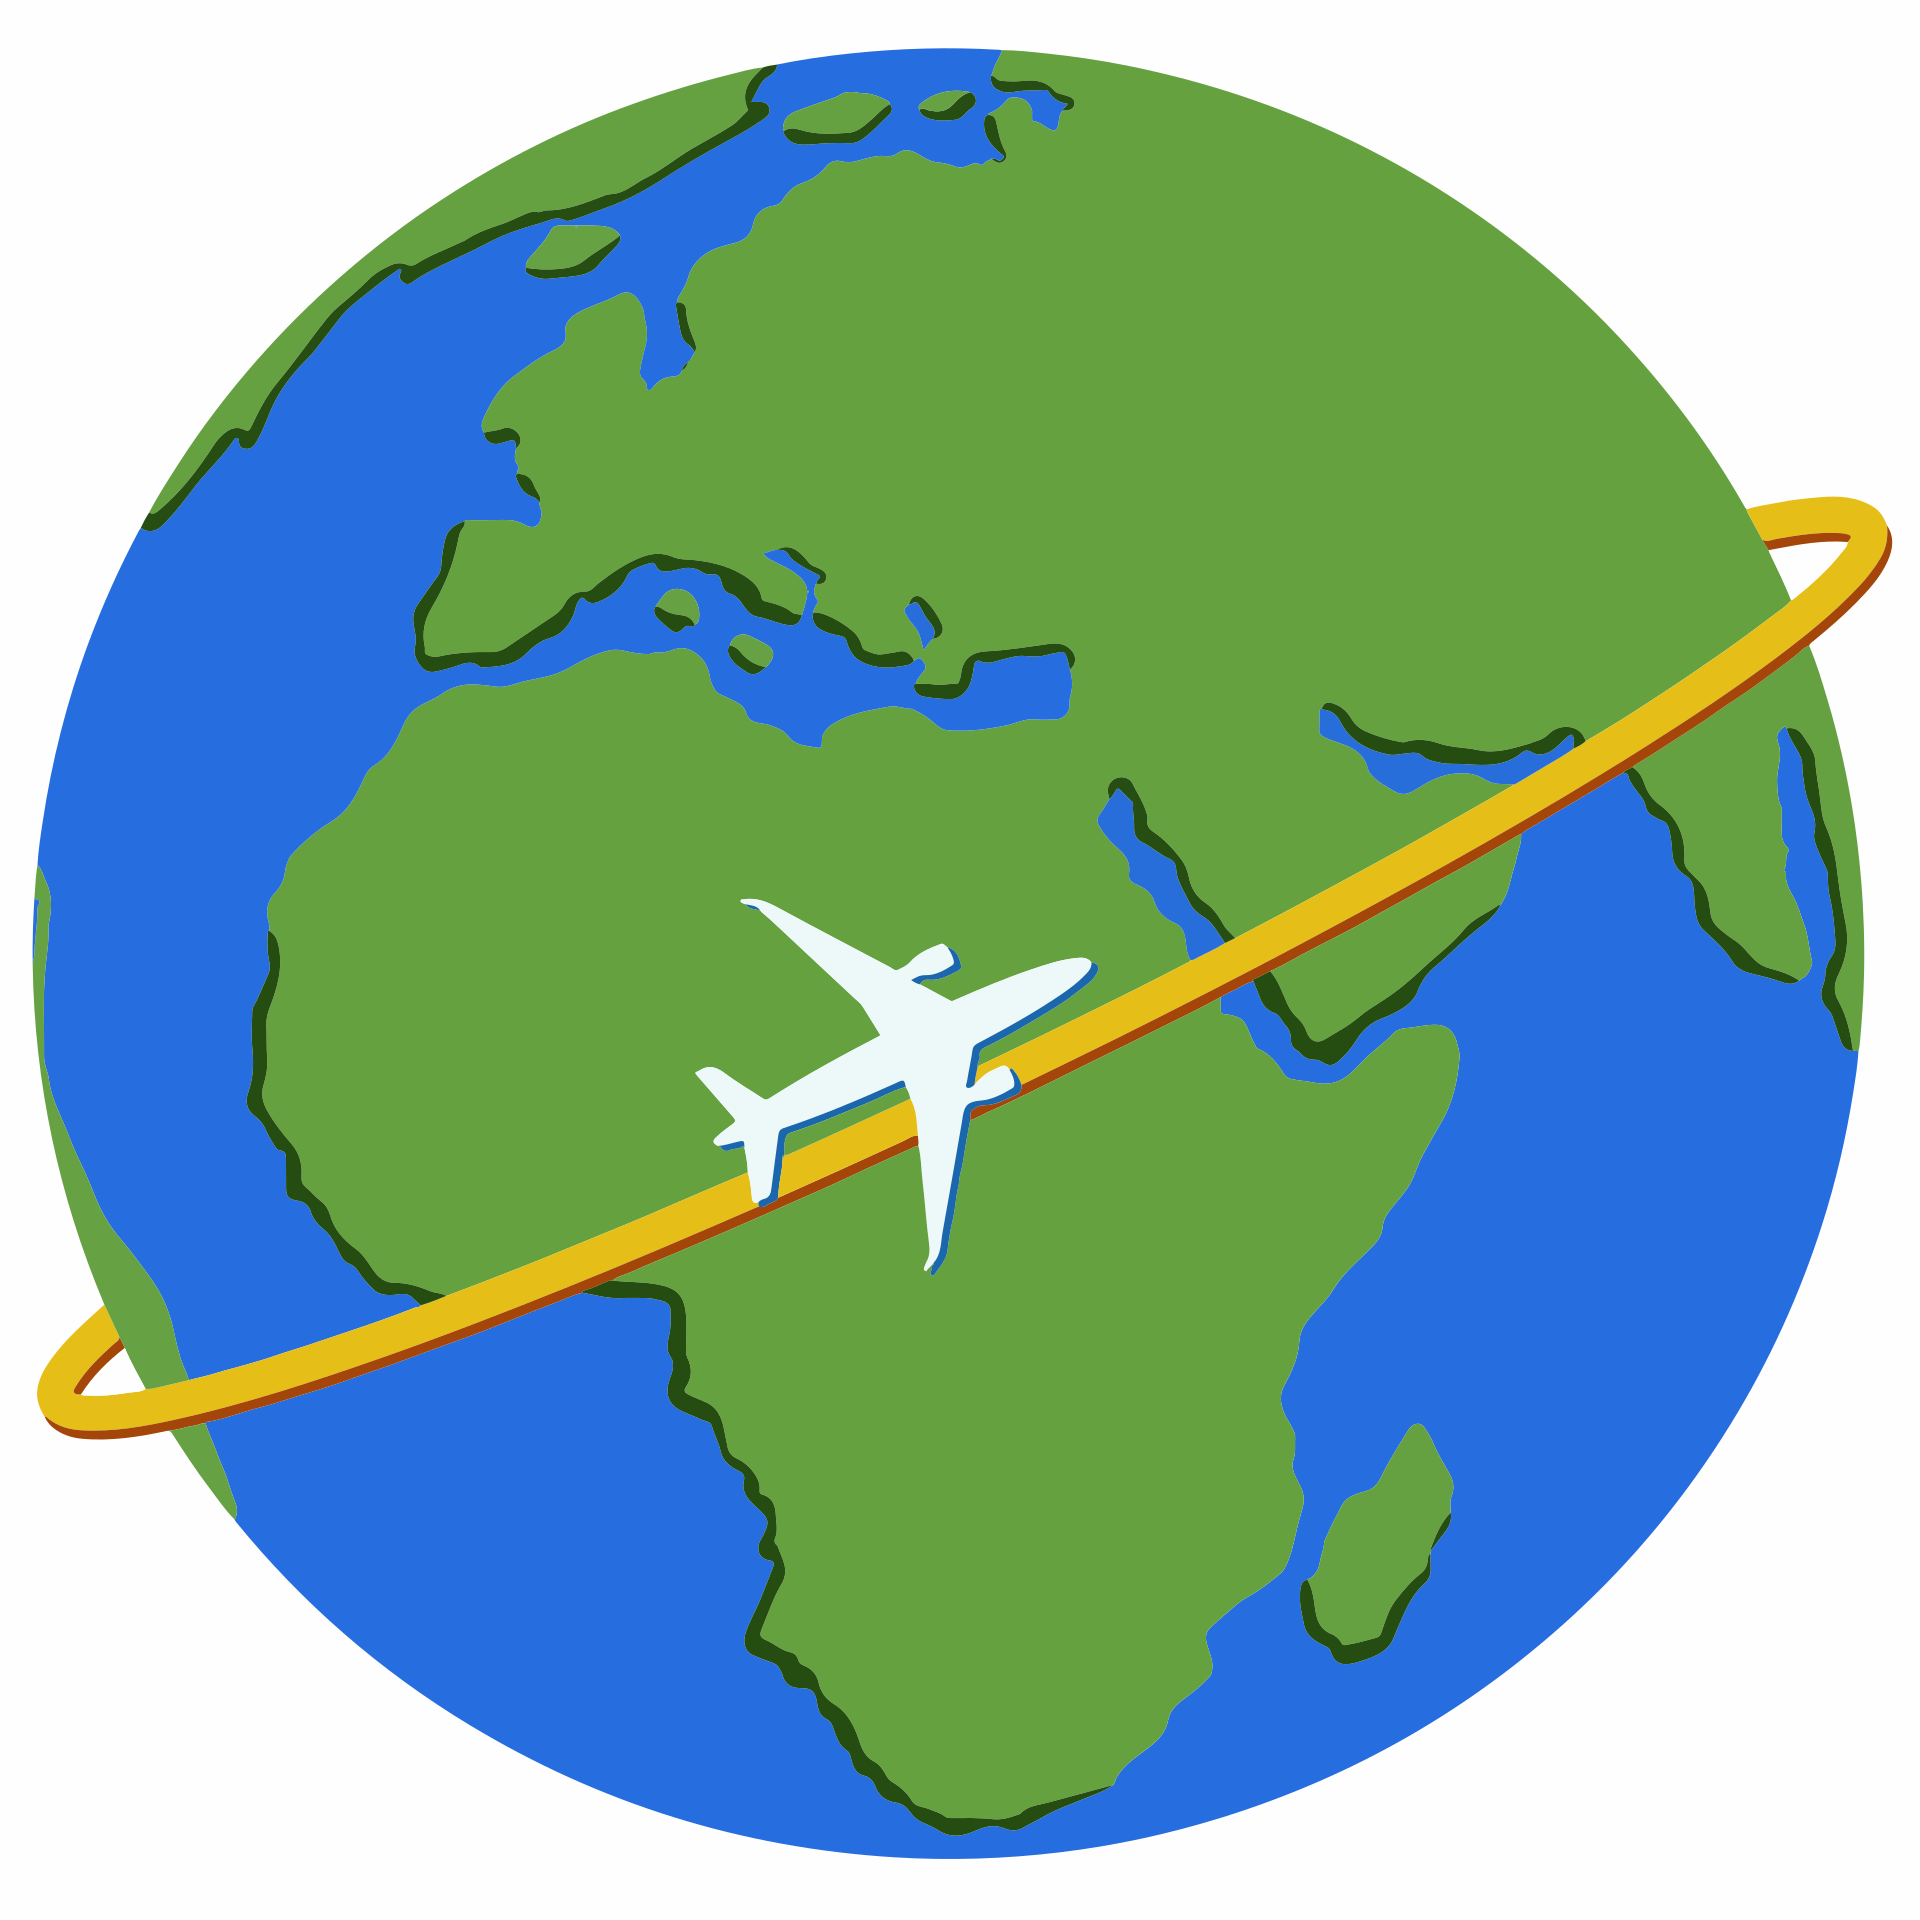 Illustration of the world with a plane circumnavigating